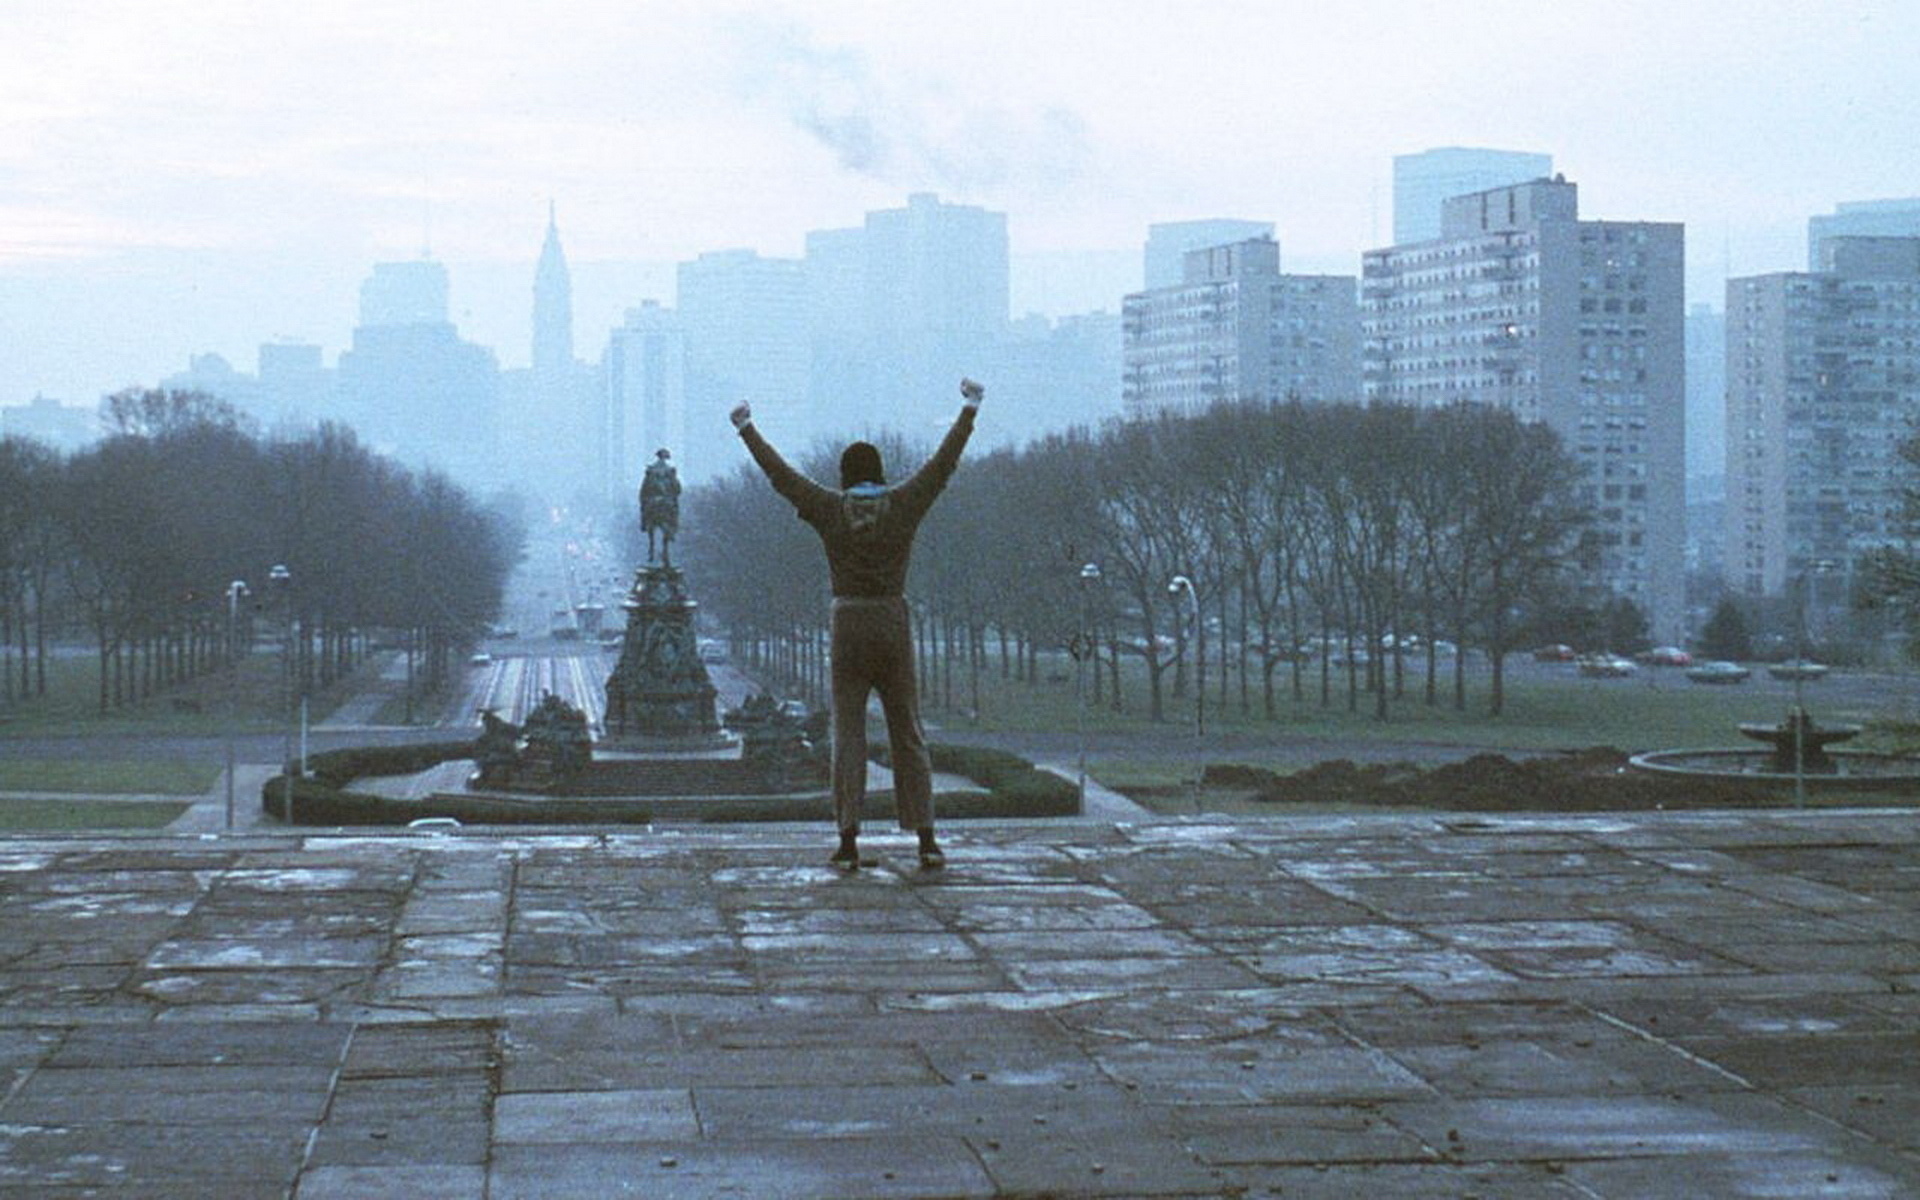 The 1976 film “Rocky” was shot in just about 28 days.